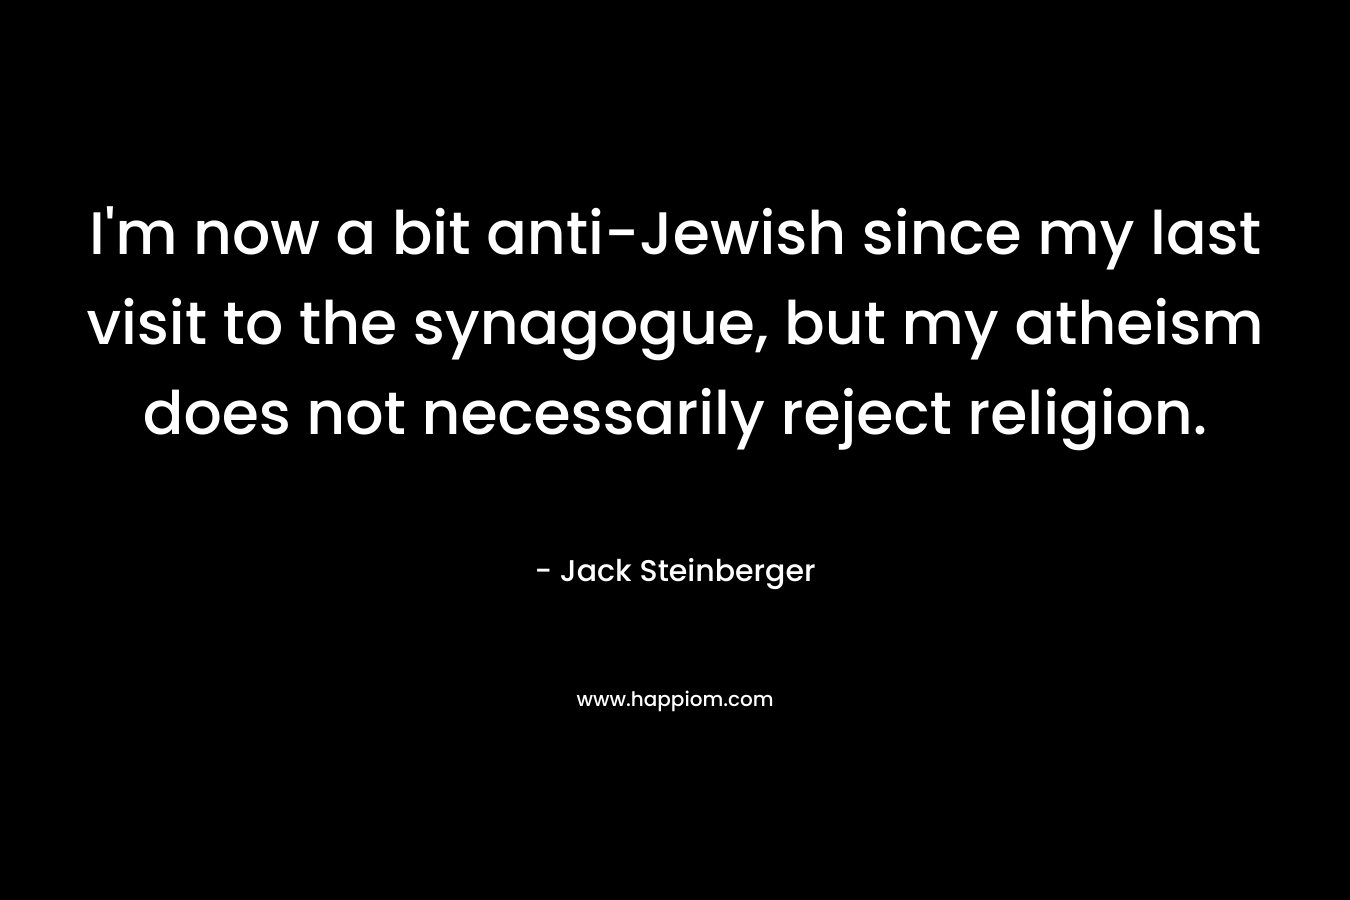 I'm now a bit anti-Jewish since my last visit to the synagogue, but my atheism does not necessarily reject religion.